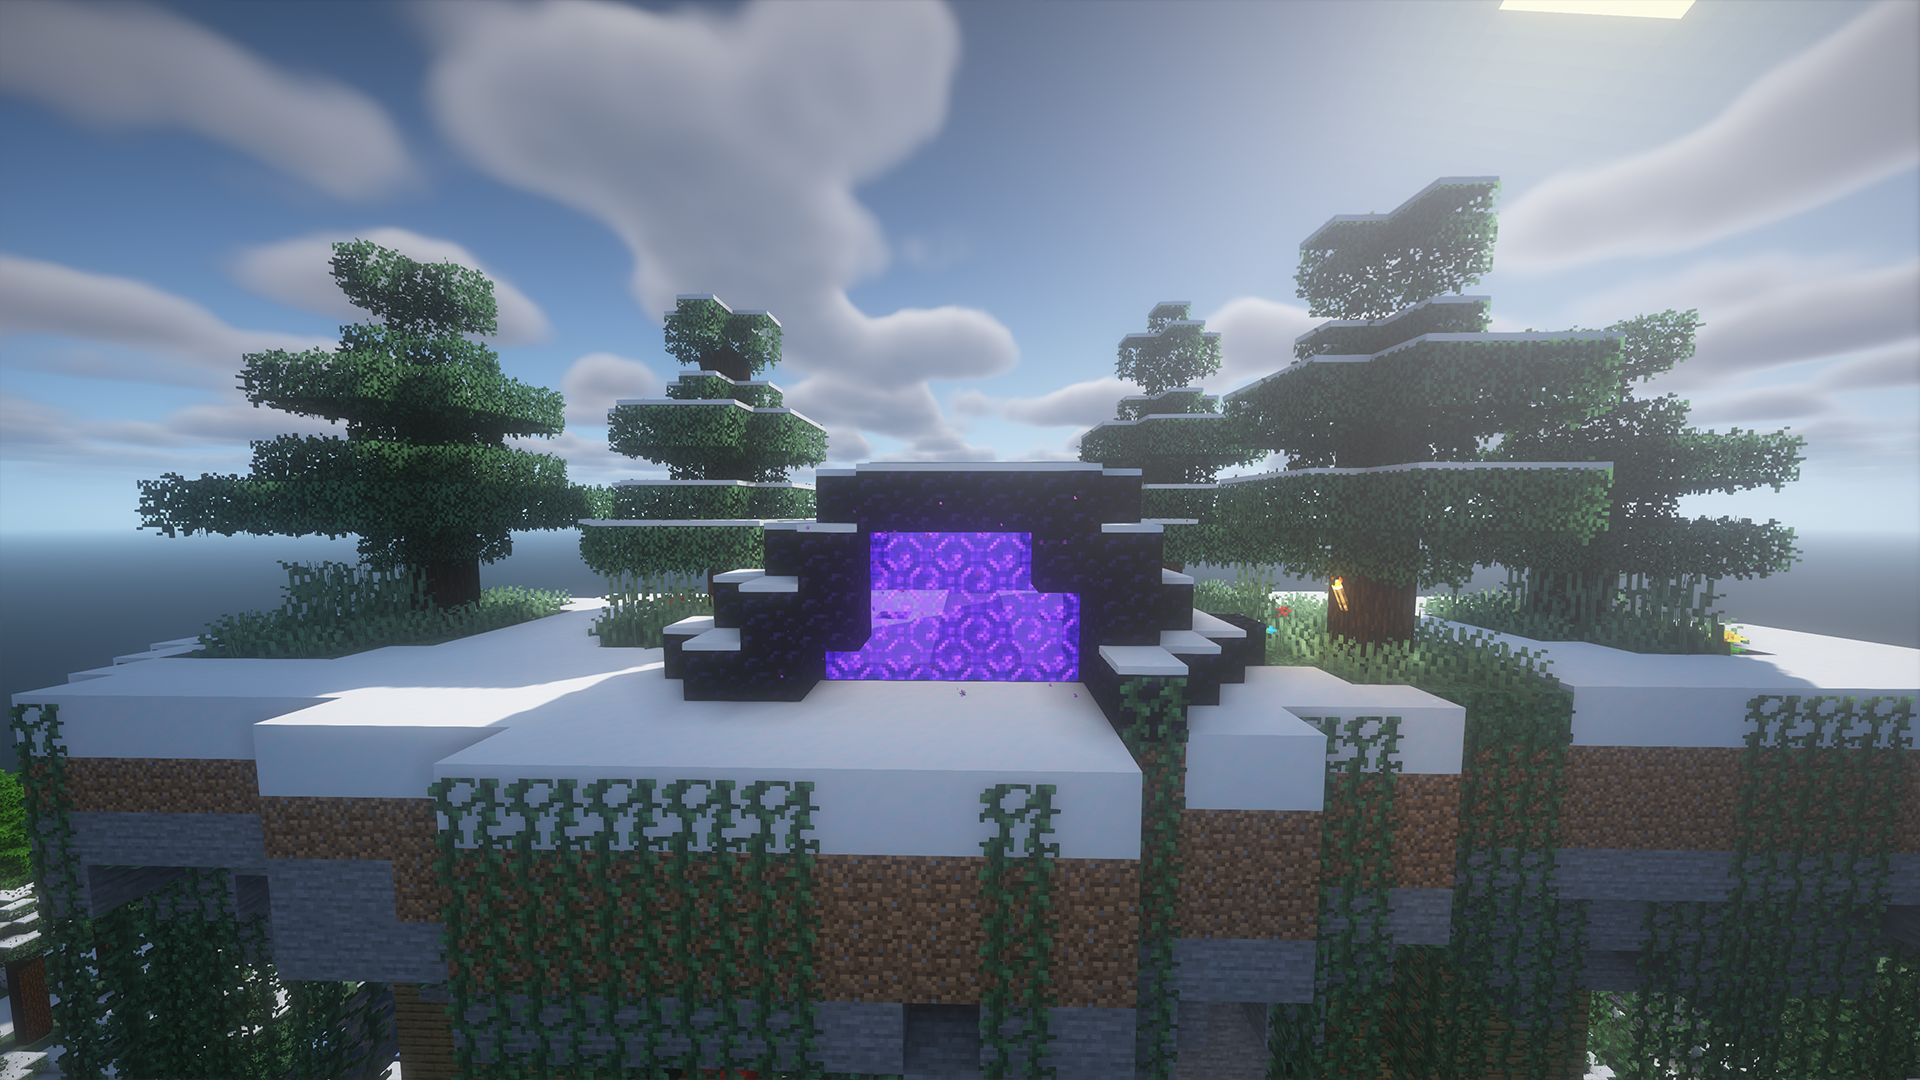 A cool portal with cool leaves with cool shaders